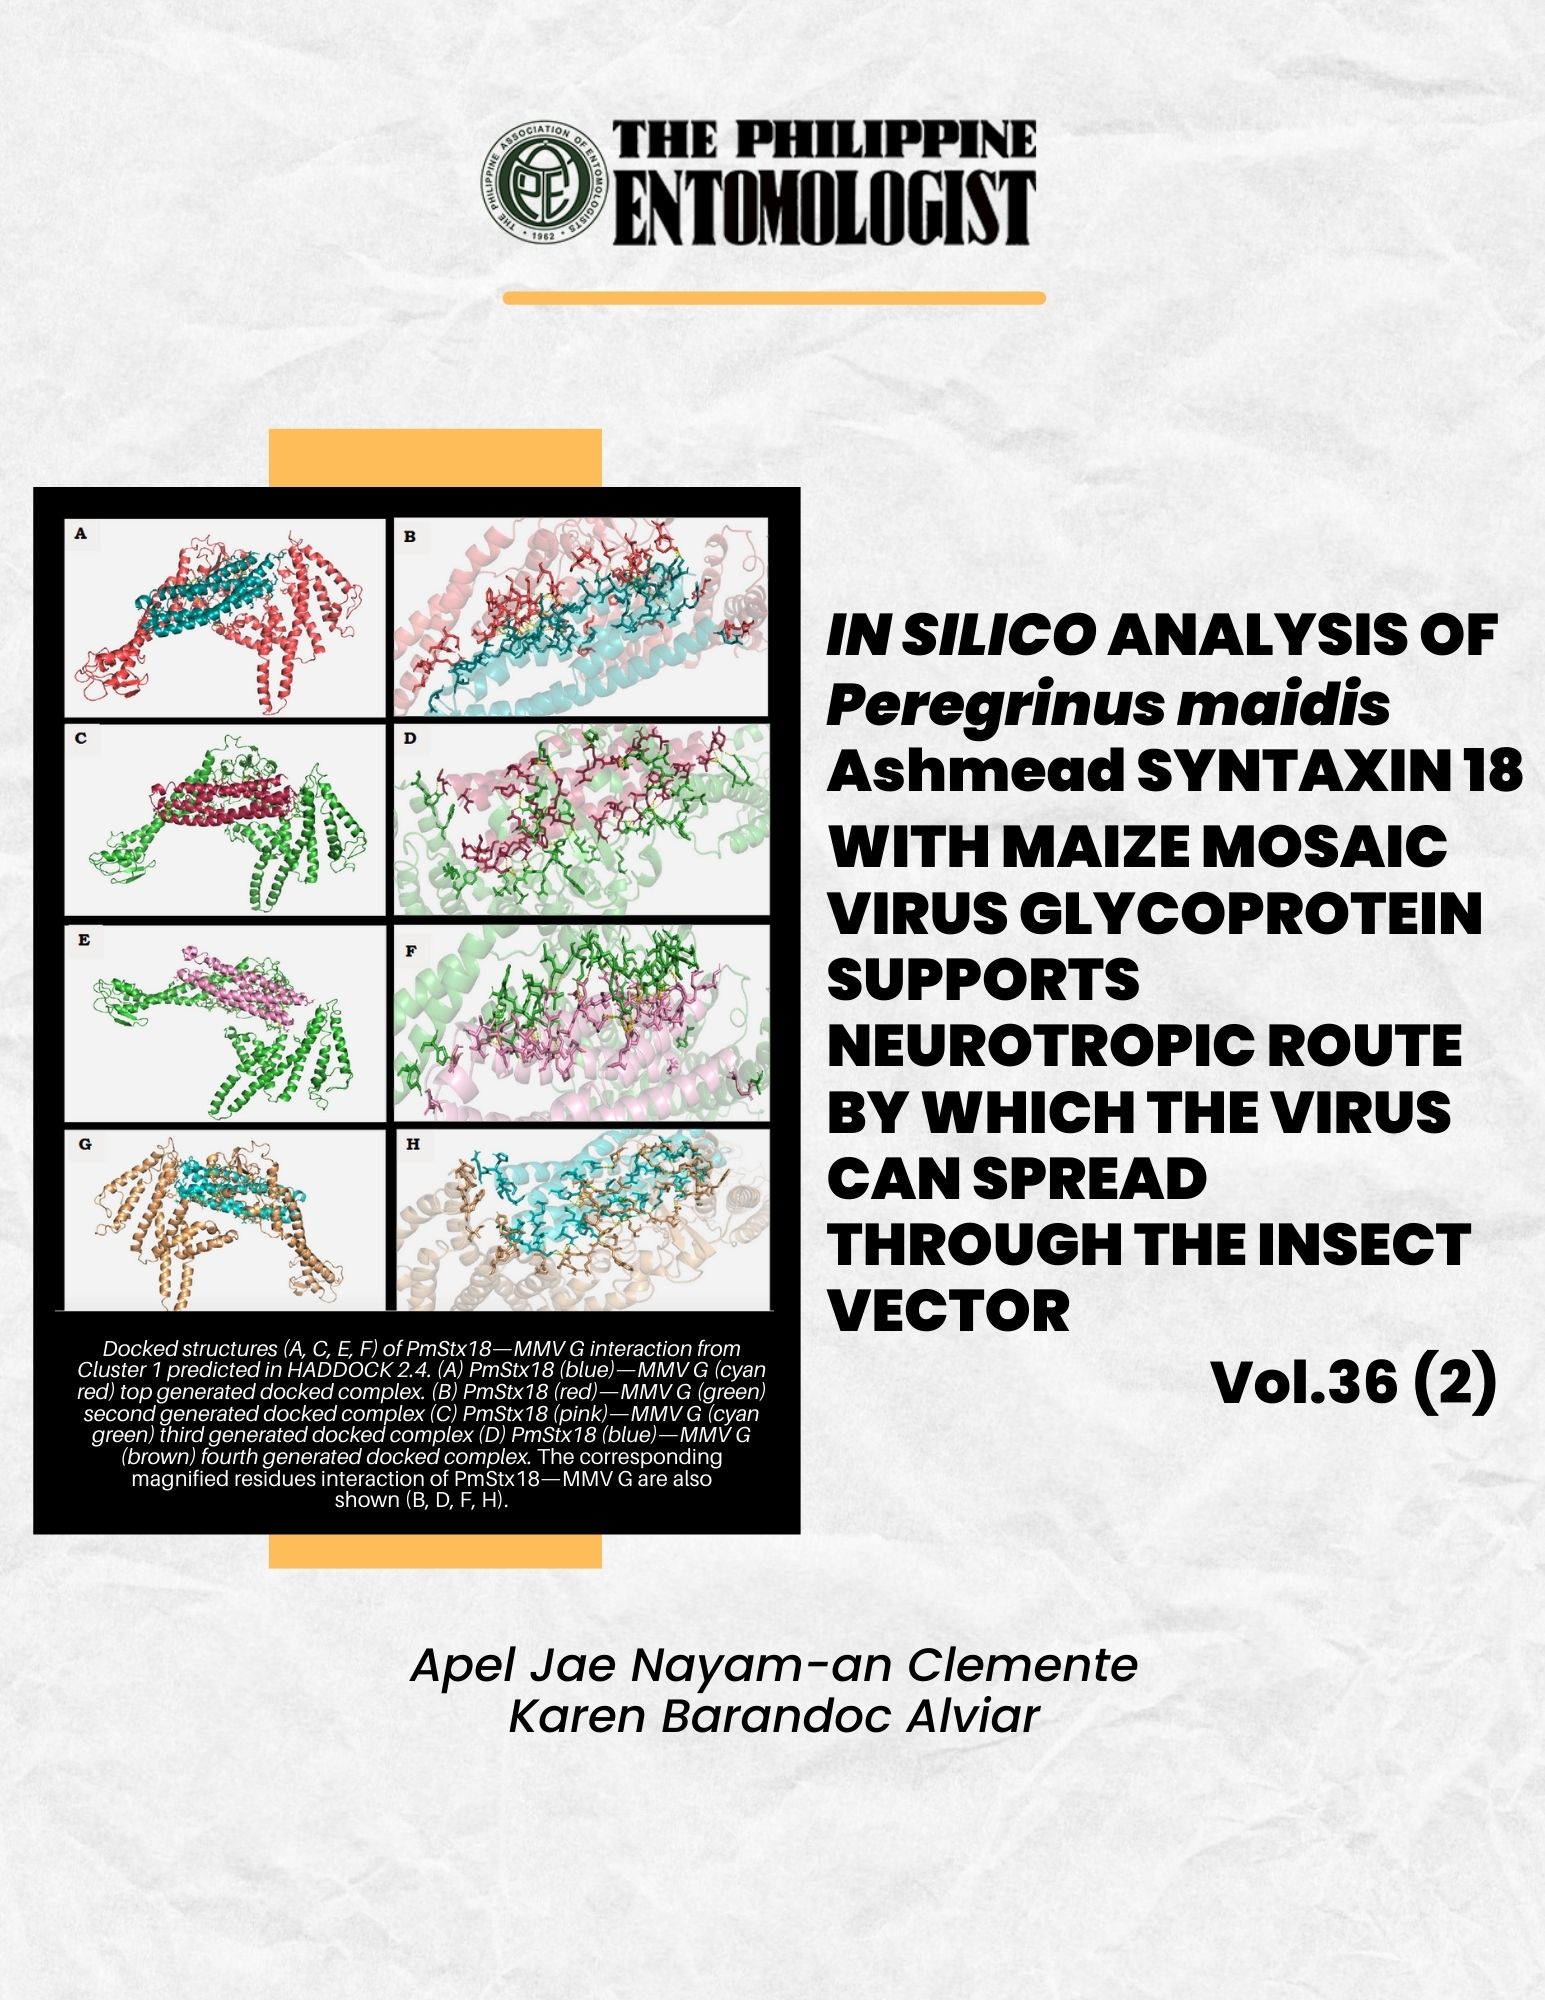 In Silico Analysis of Peregrinus maidis Ashmead Syntaxin 18 with Maize Mosaic Virus Glycoprotein Supports Neurotropic Route by which the virus can spread through the insect vector.